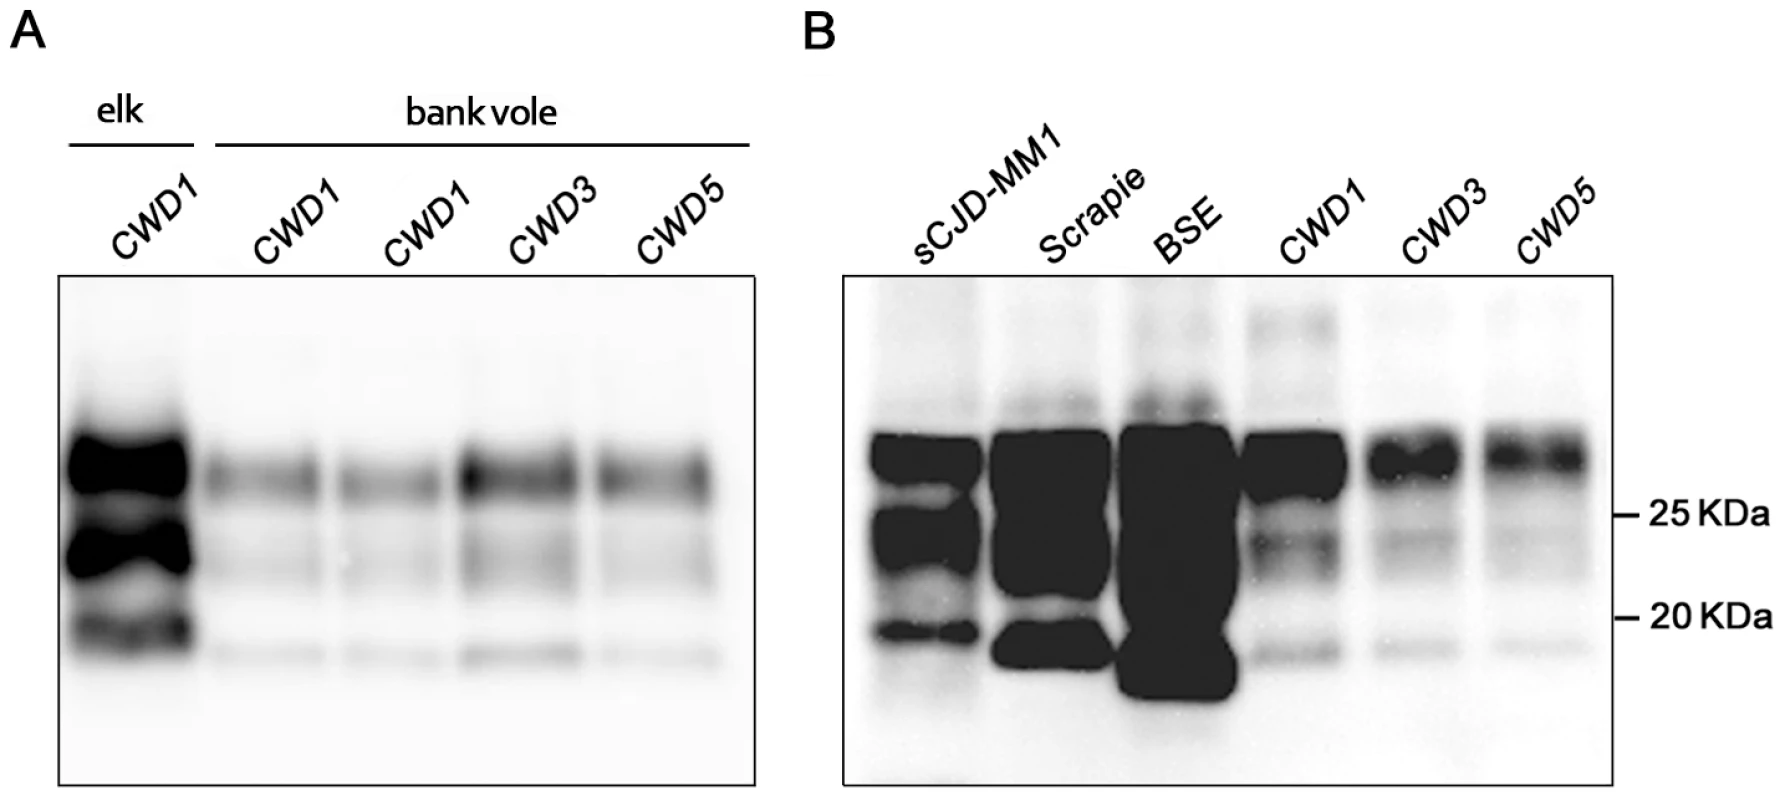 Western blot analysis of the PrP<sup>res</sup> level in the brain of CWD-affected voles.